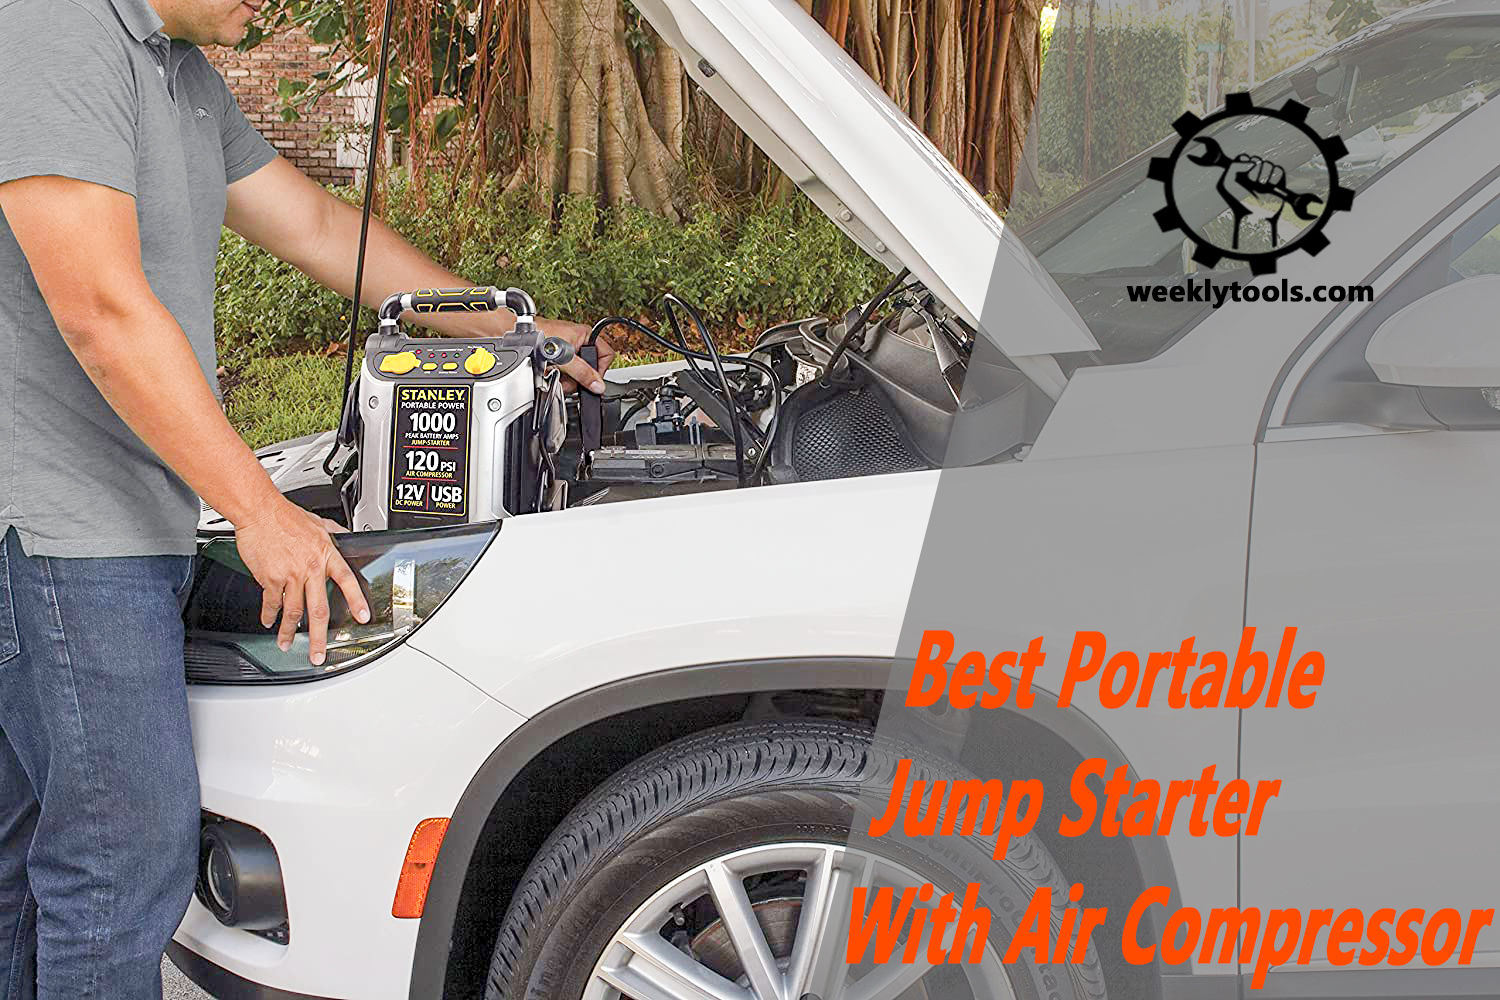 Best Portable Jump Starter With Air Compressor